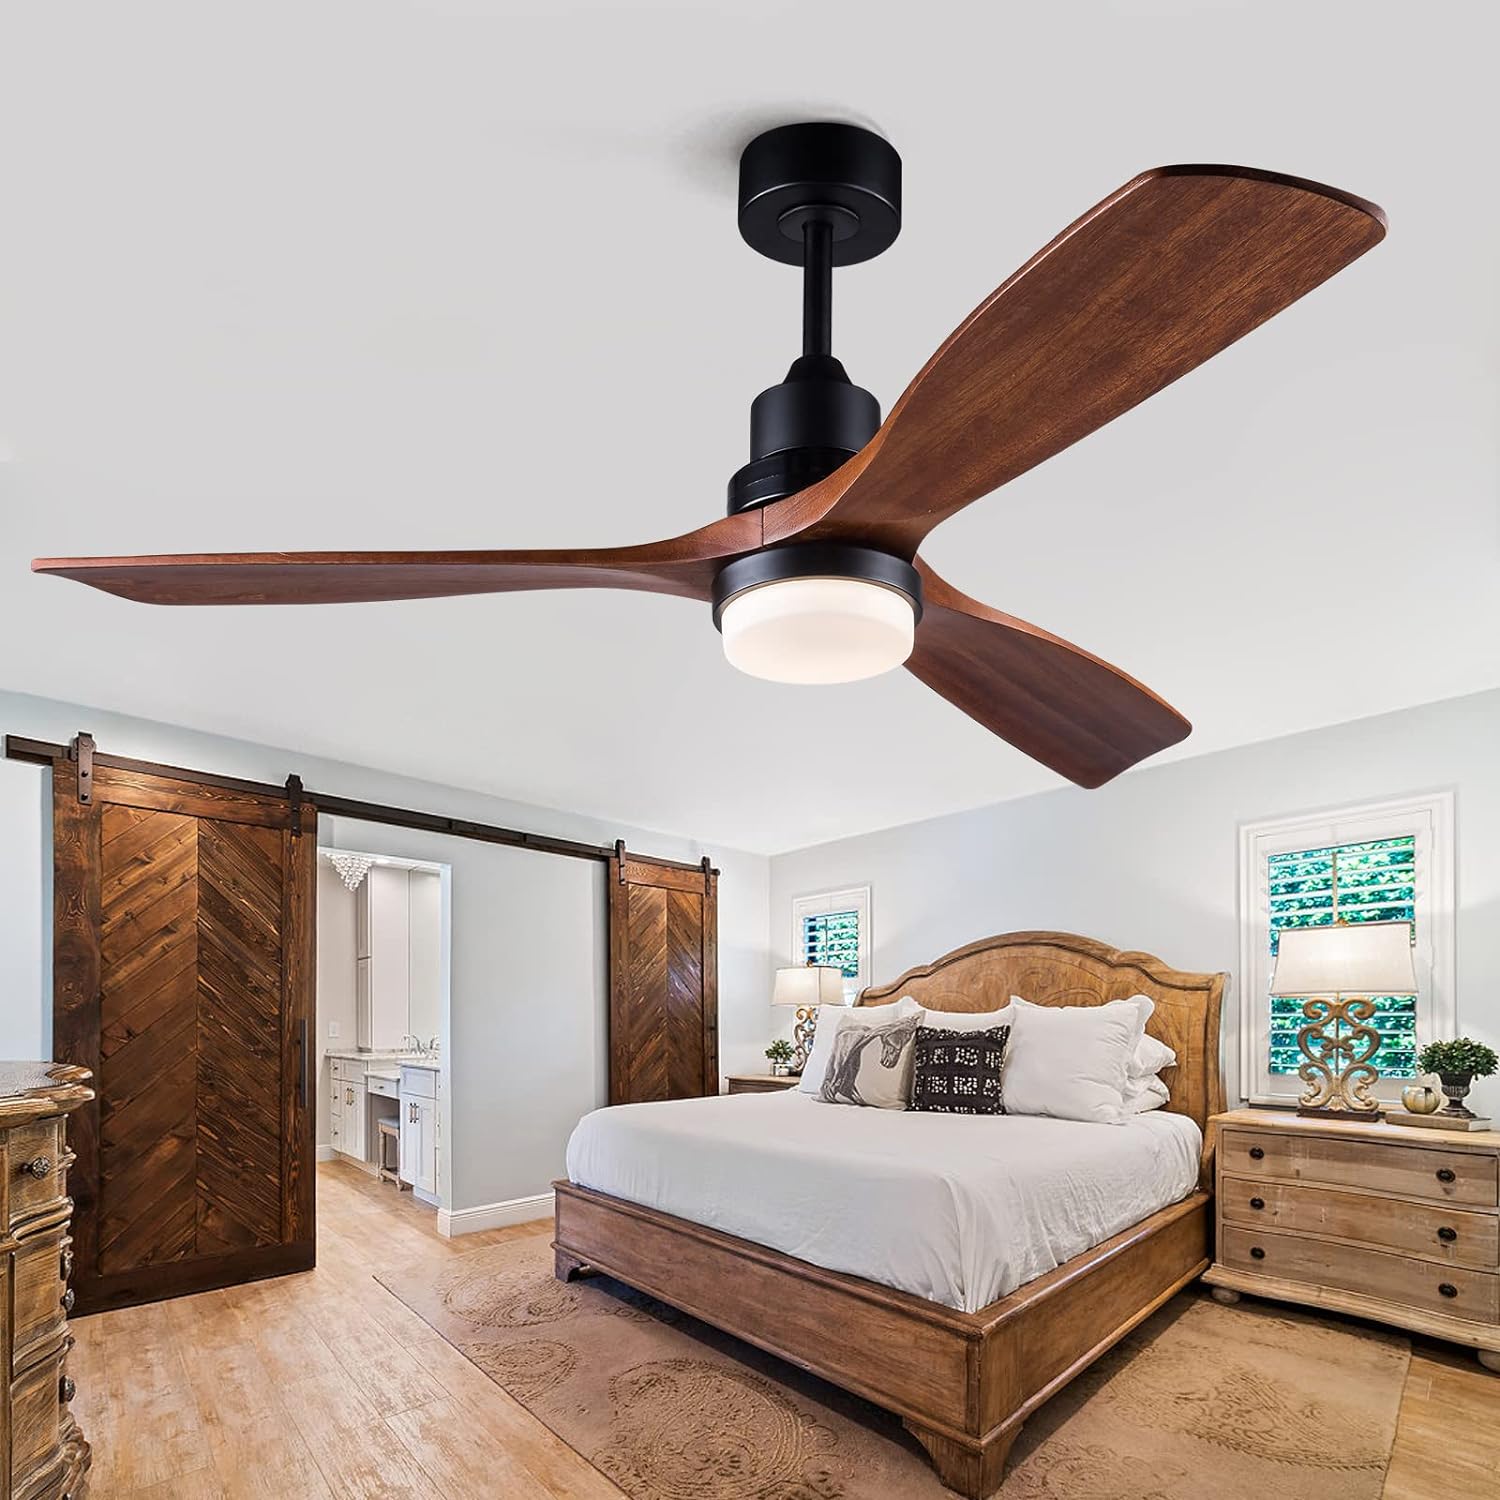 BOJUE 60 Ceiling Fans with Lights Remote Control, Indoor Outdoor Wood Ceiling with 3 Blade Fan for Patio Living Room, Bedroom, Office, Summer House,Etc